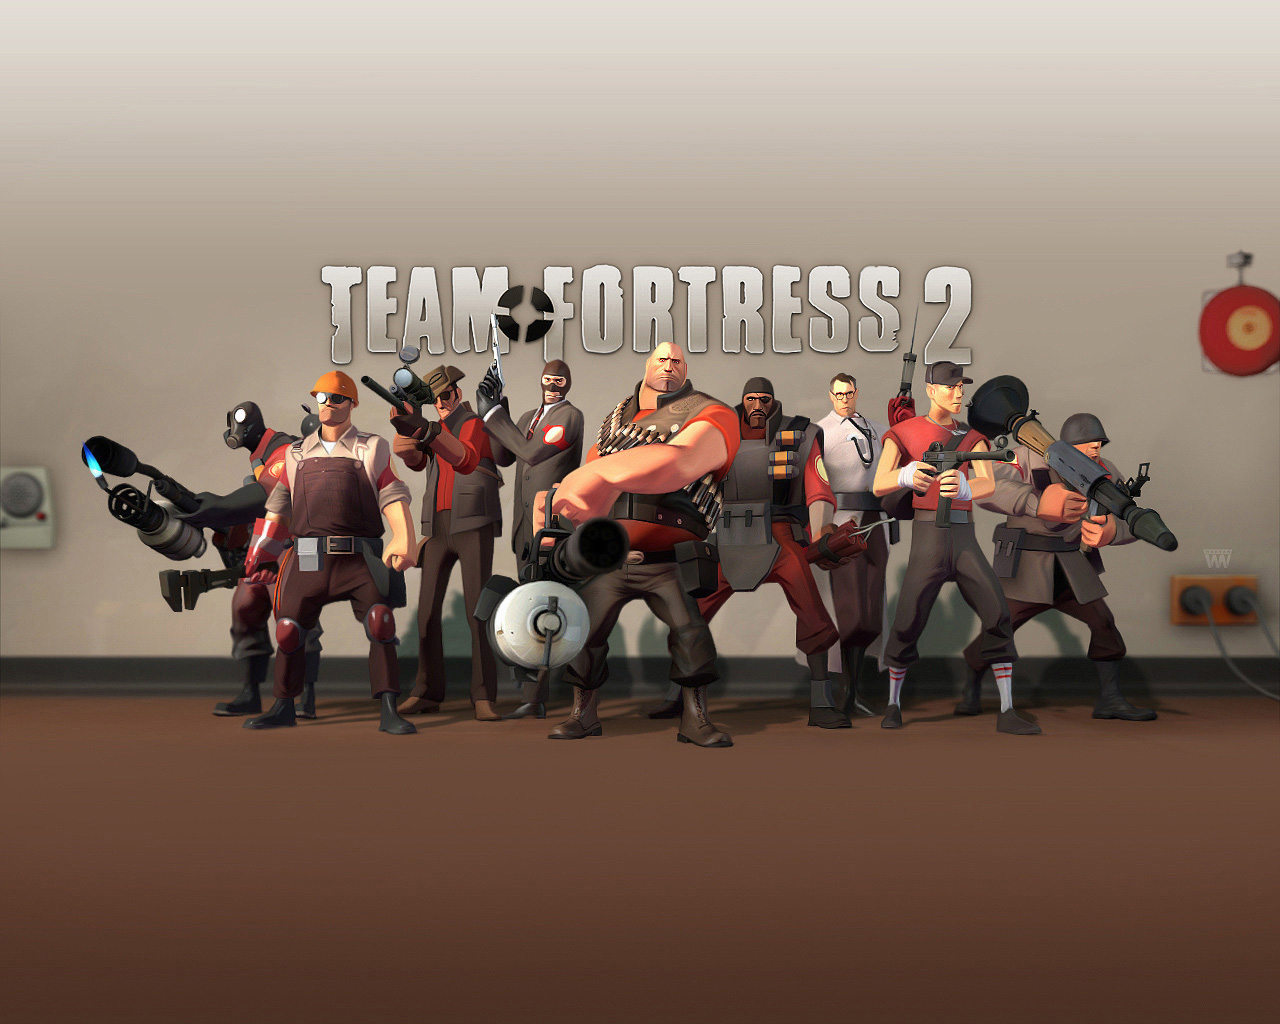 team fortress 2, video game, engineer (team fortress), heavy (team fortress), medic (team fortress), pyro (team fortress), scout (team fortress), sniper (team fortress), soldier (team fortress), spy (team fortress)